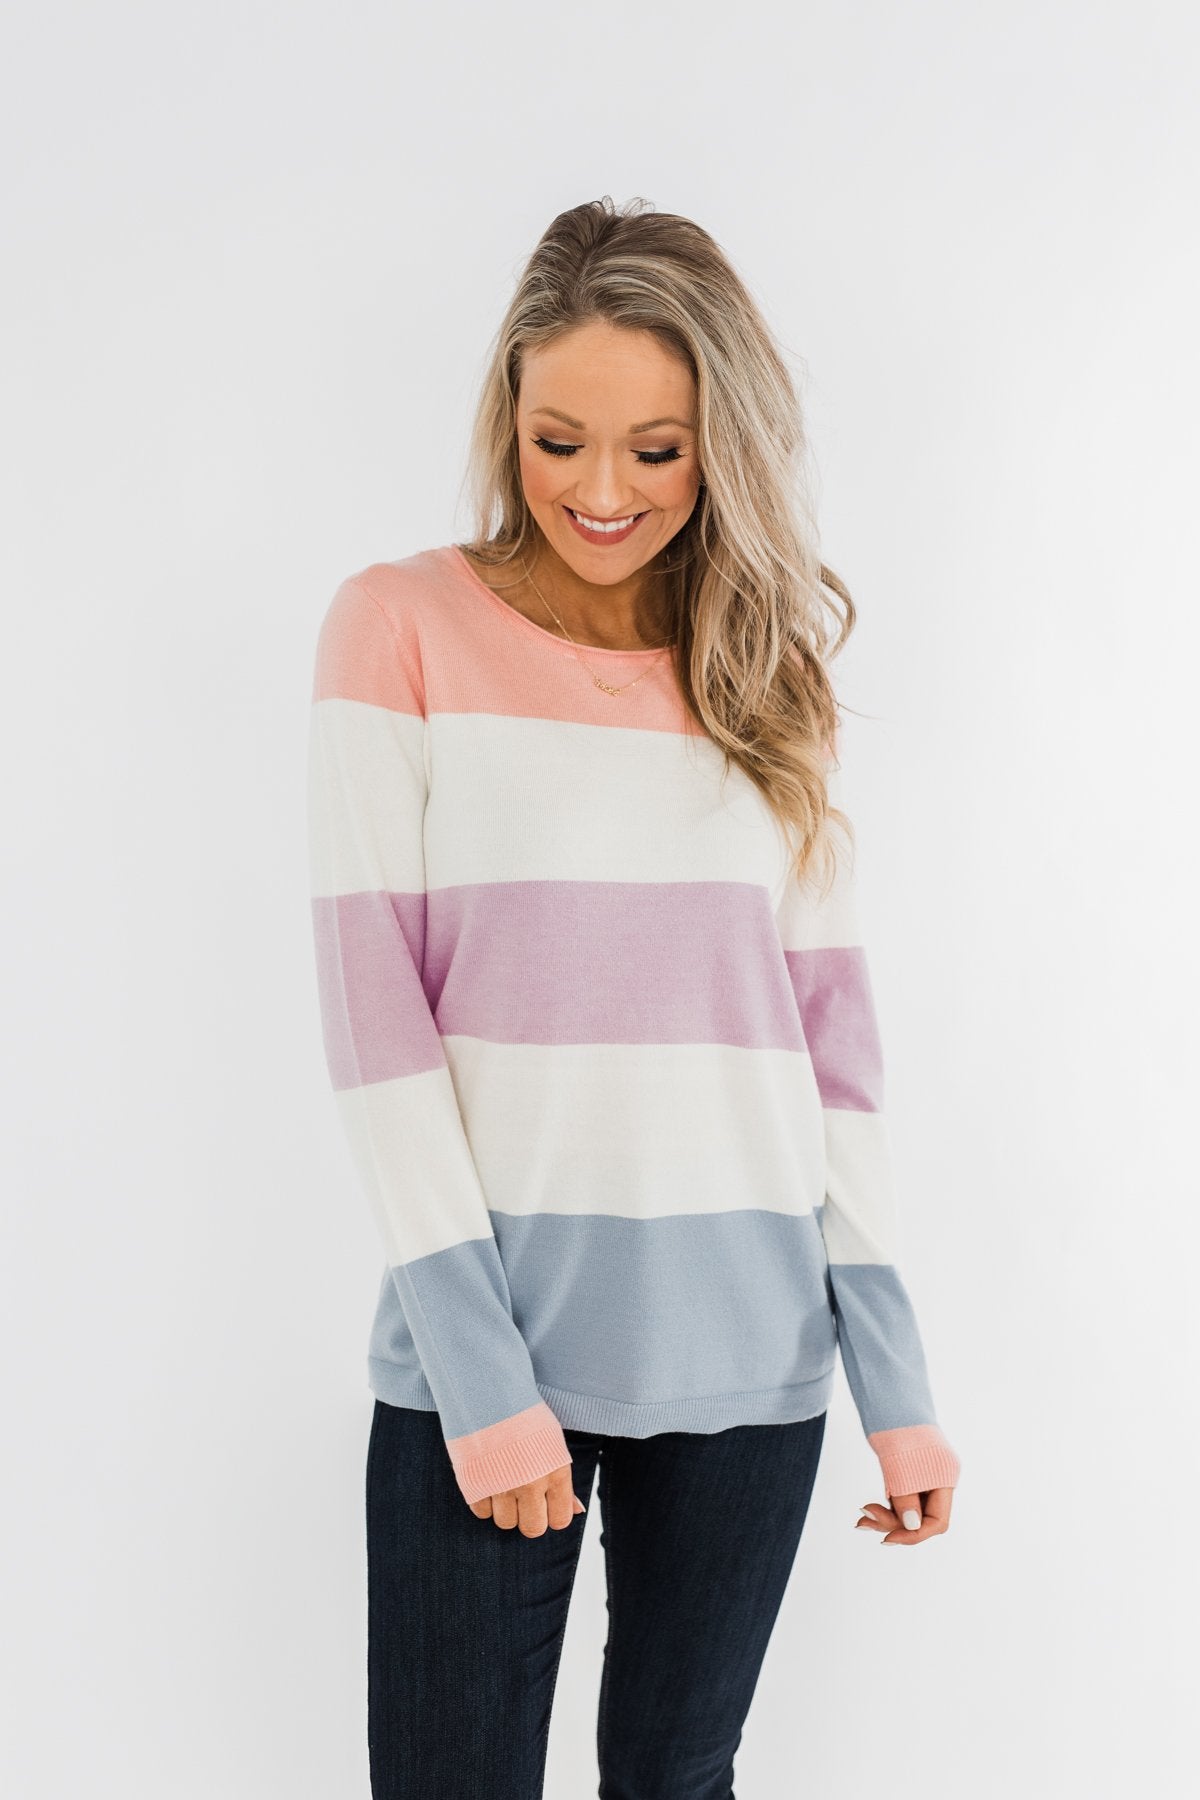 Here She Comes Sweater- Peach, Orchid & Steal Blue